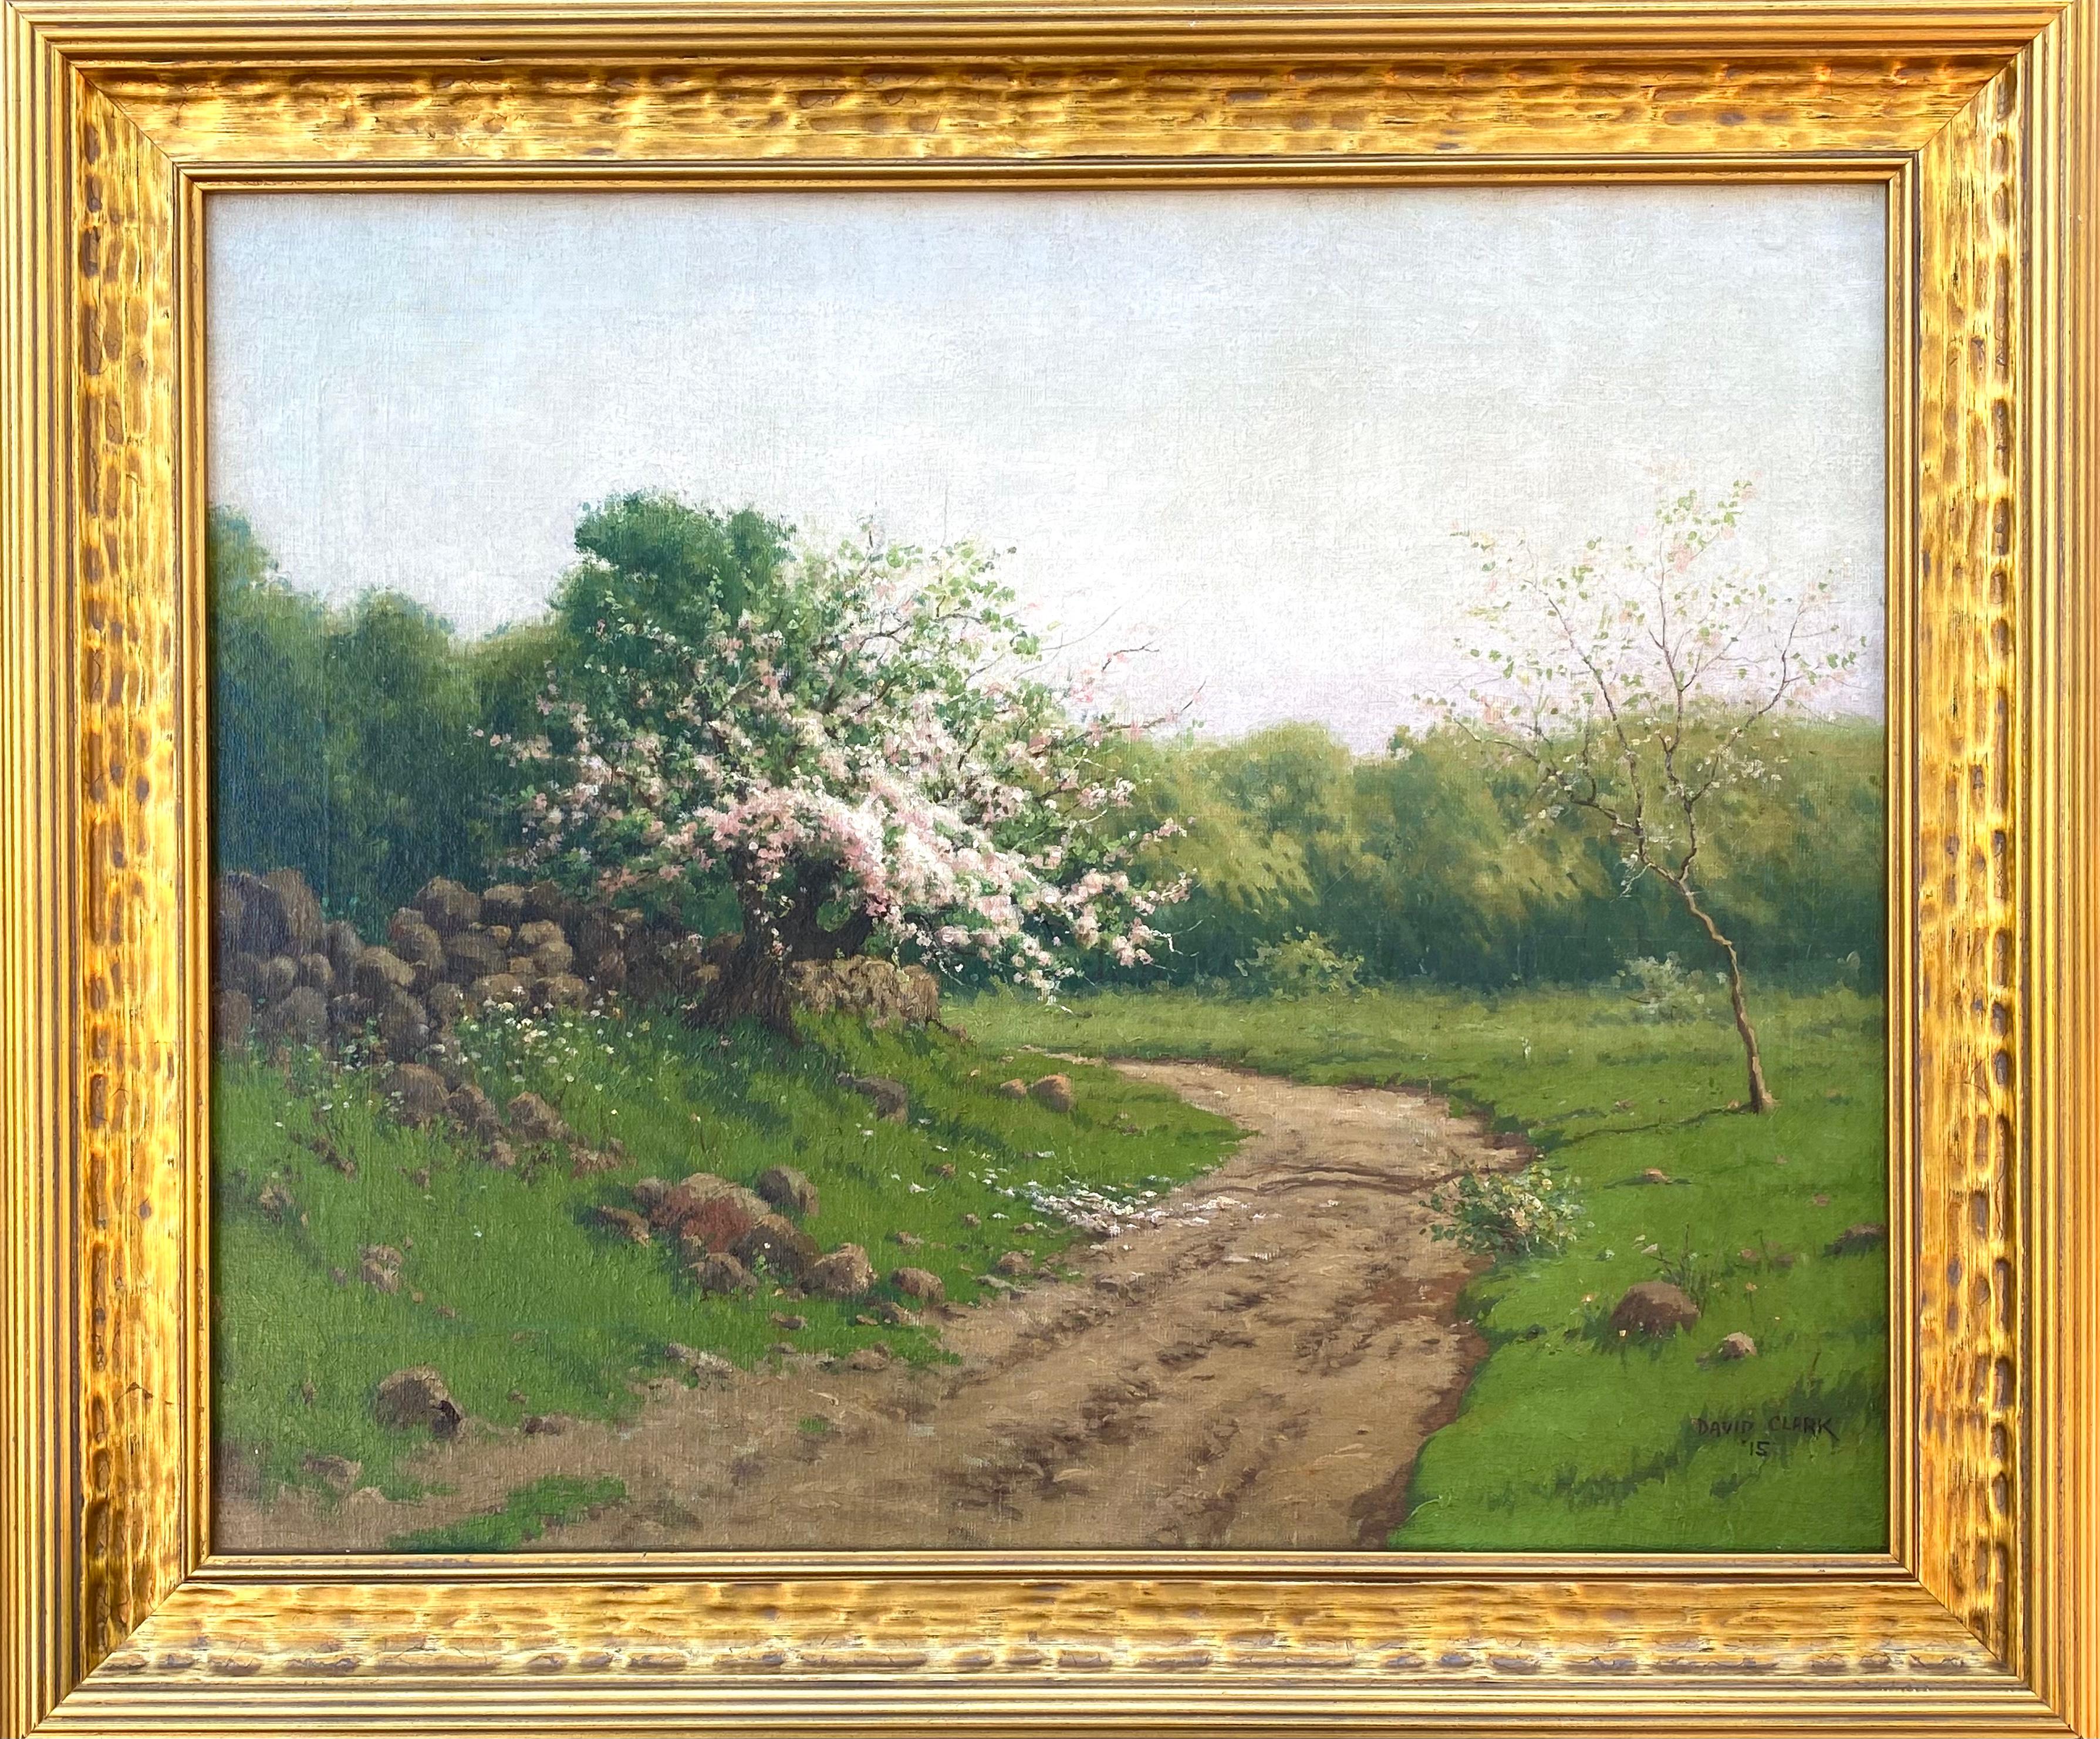 “Apple Blossom Time” - Gray Landscape Painting by David Clark